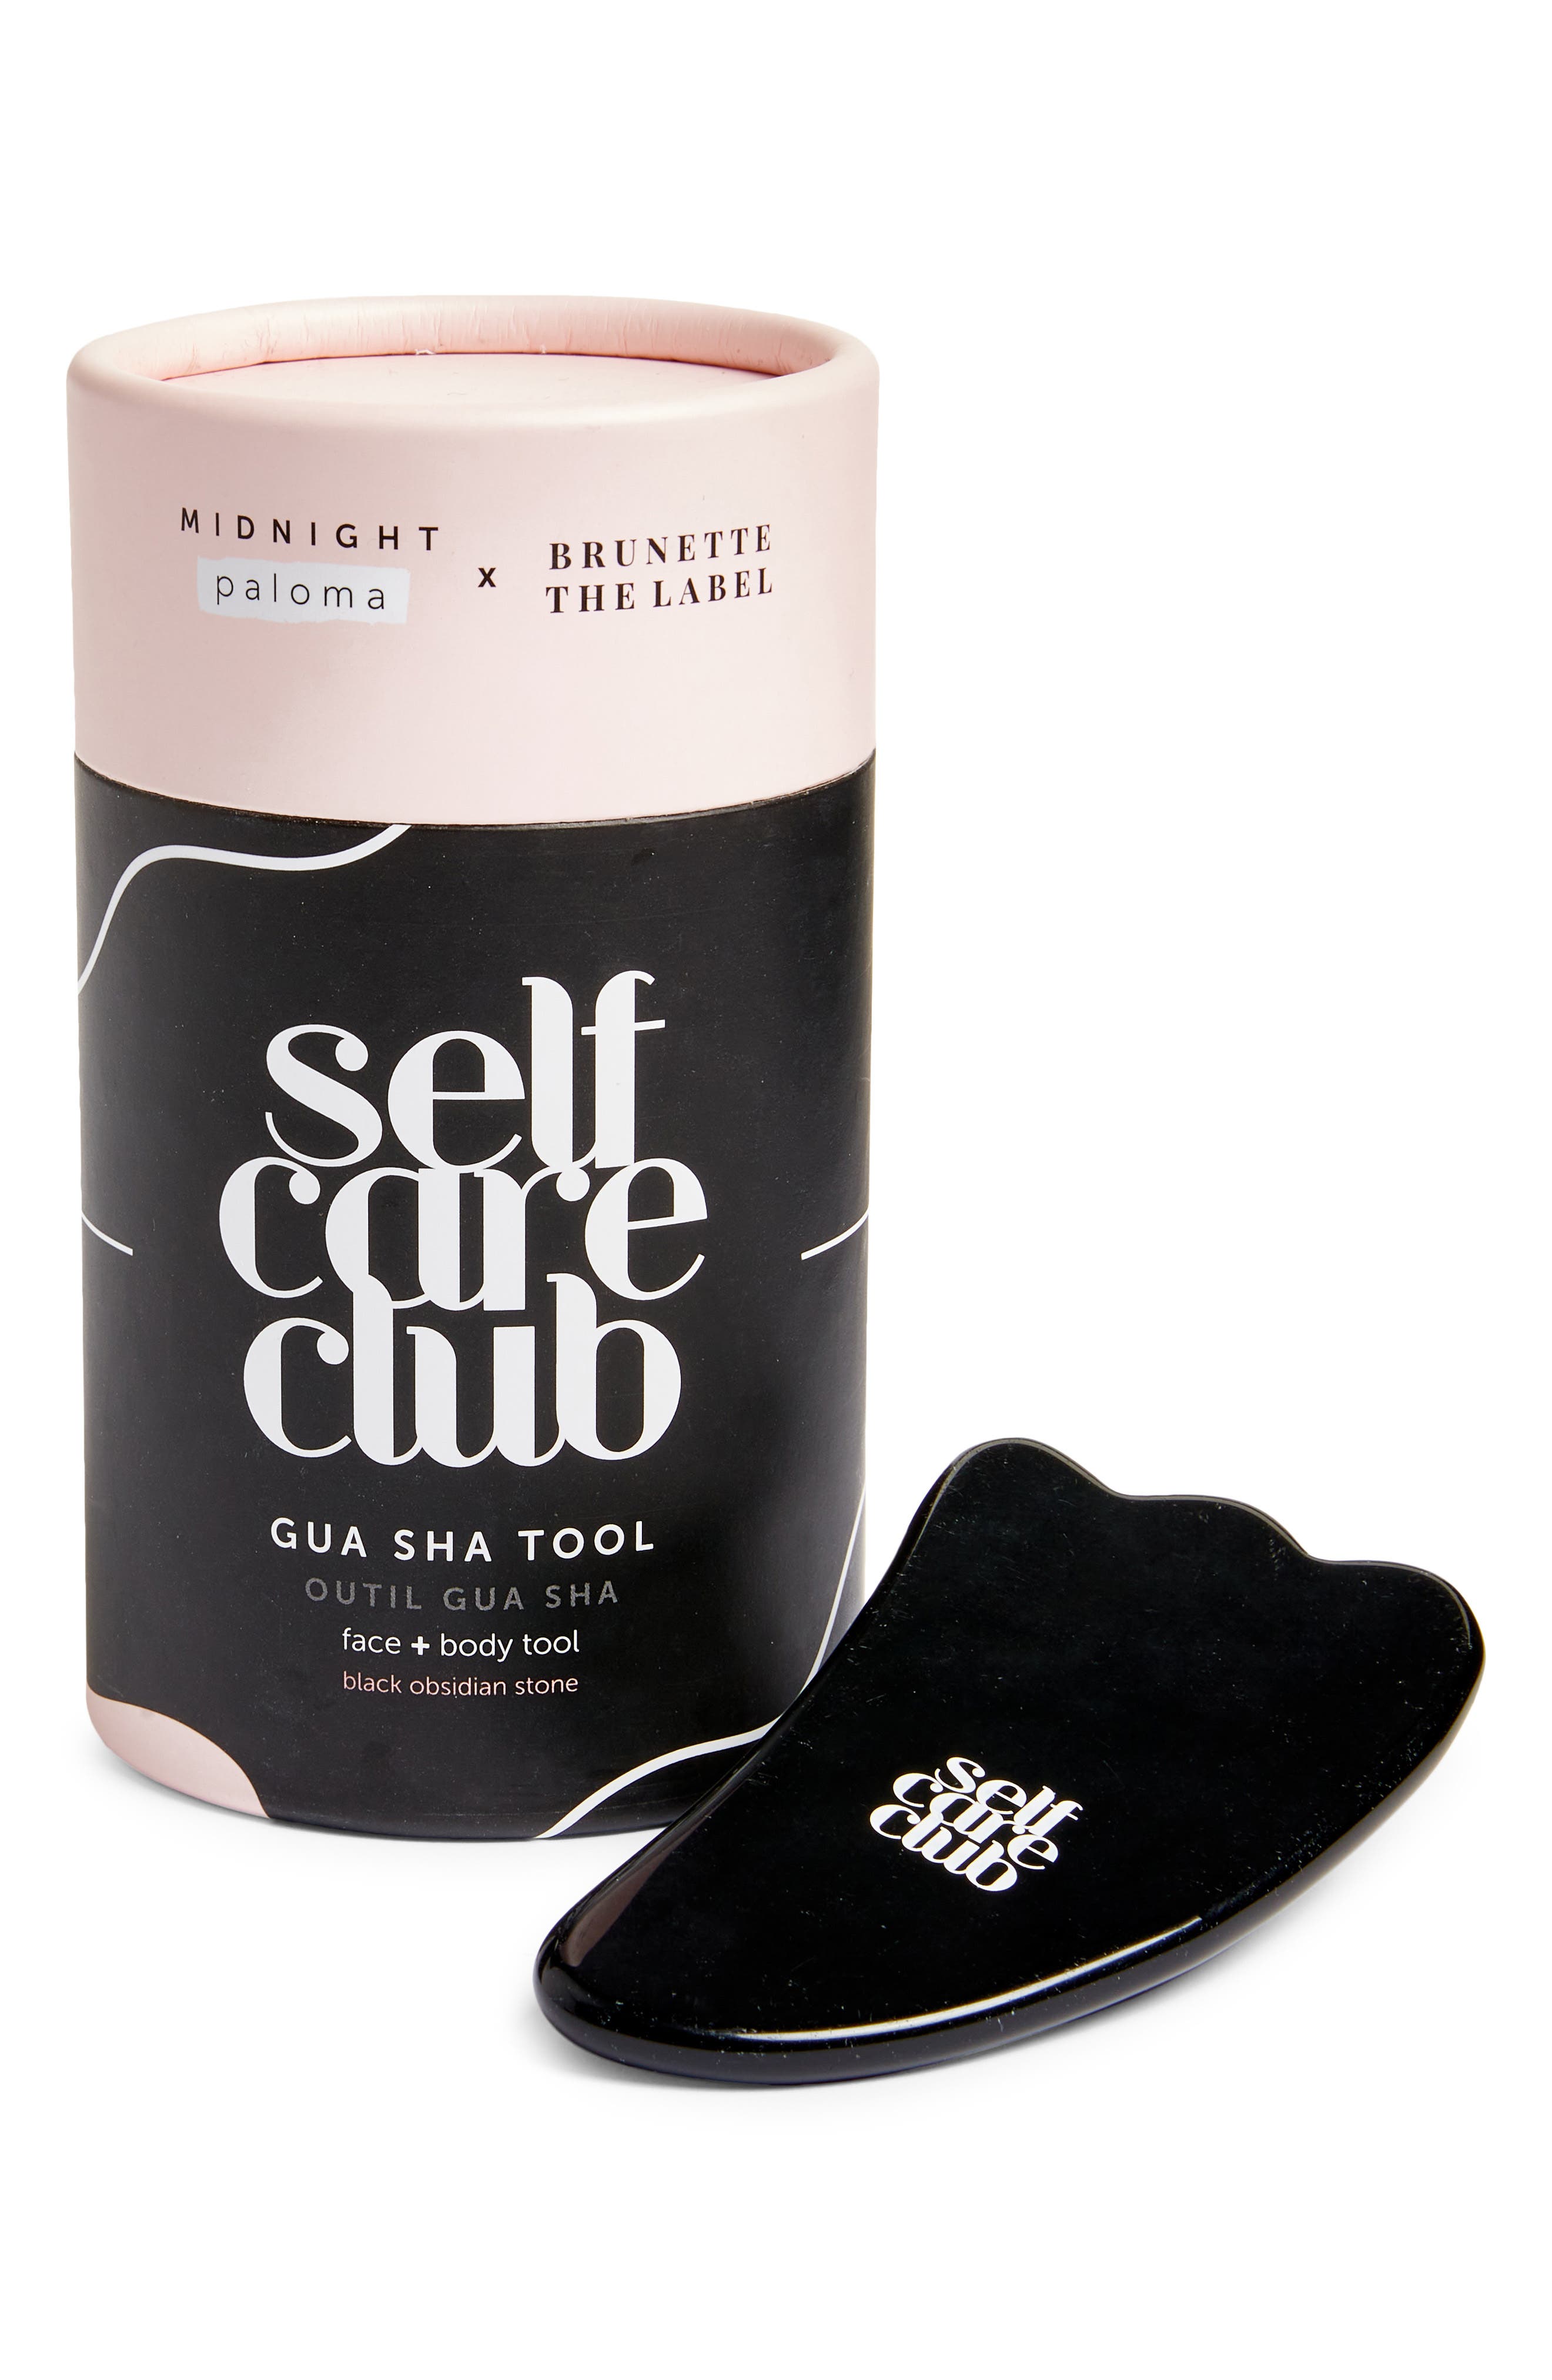 MIDNIGHT PALOMA x BRUNETTE the Label Self Care Club Black Obsidian Gua Sha Face & Body Tool in None at Nordstrom